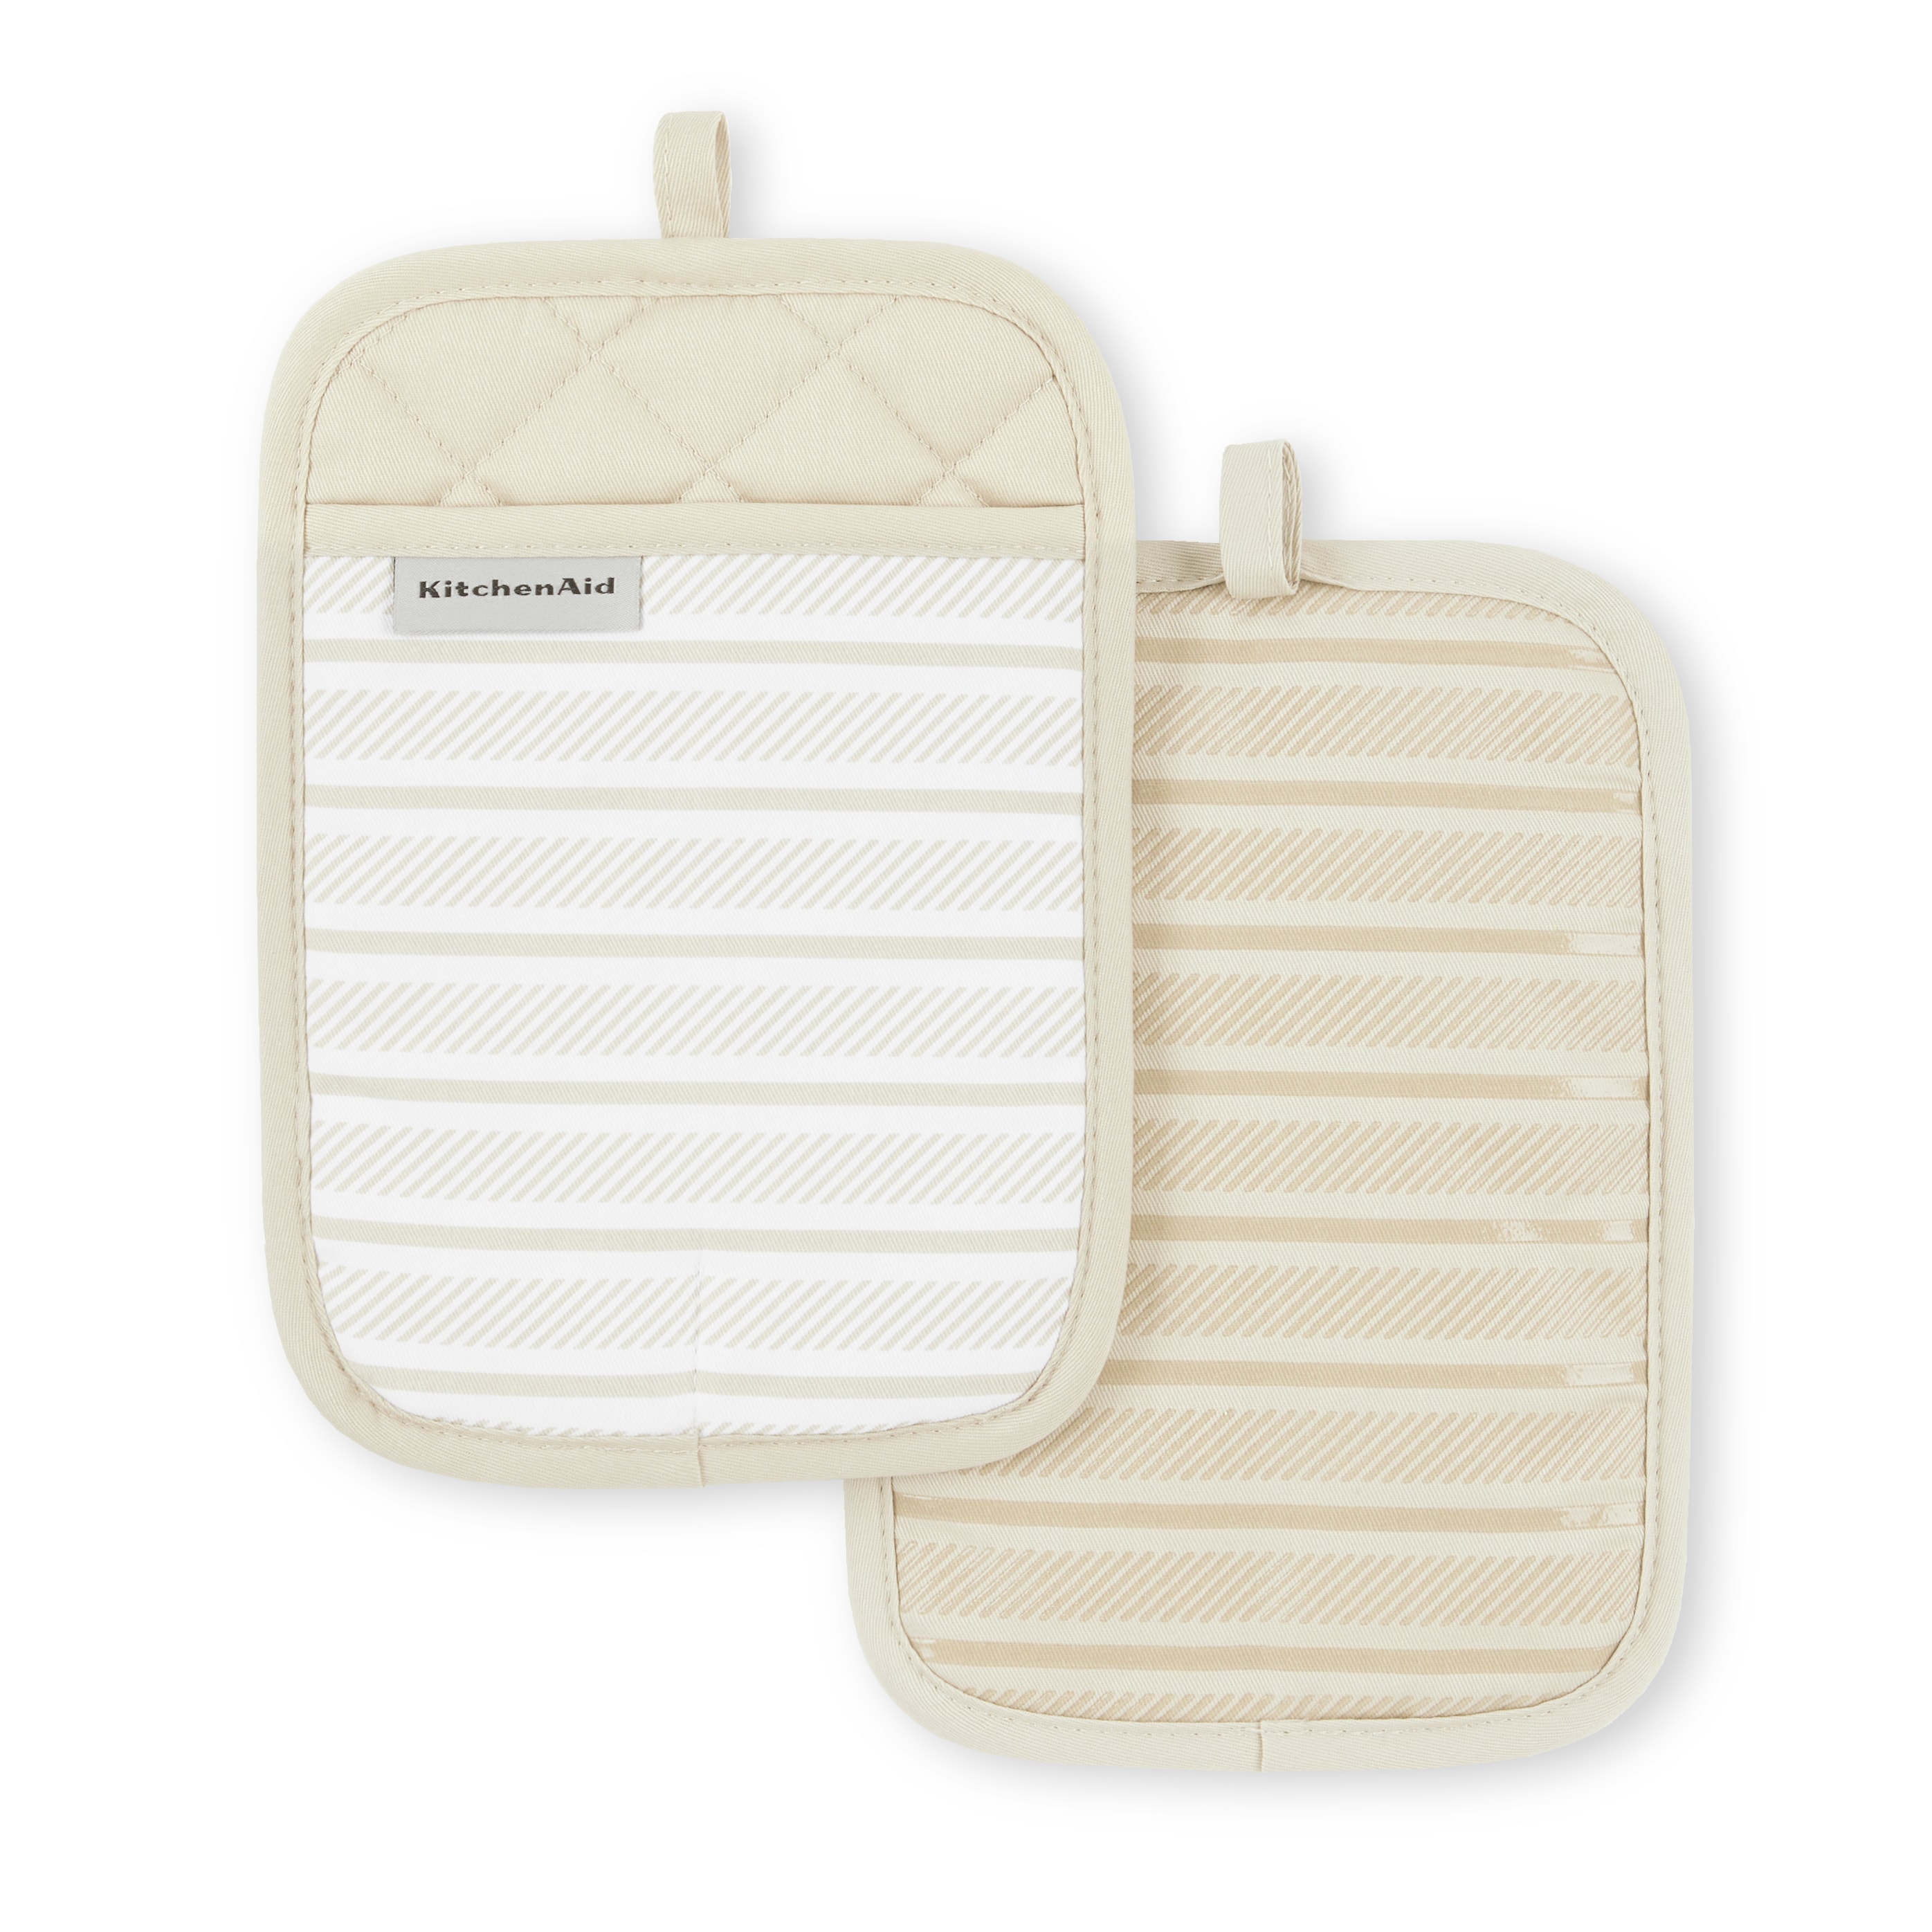 KitchenAid Albany Pot Holder Set - 2 Pack - Durable Heat Resistant Cotton -  Slip-Resistant Silicone Grip - Off-white Milkshake Color - 7x10 Inches in  the Kitchen Towels department at